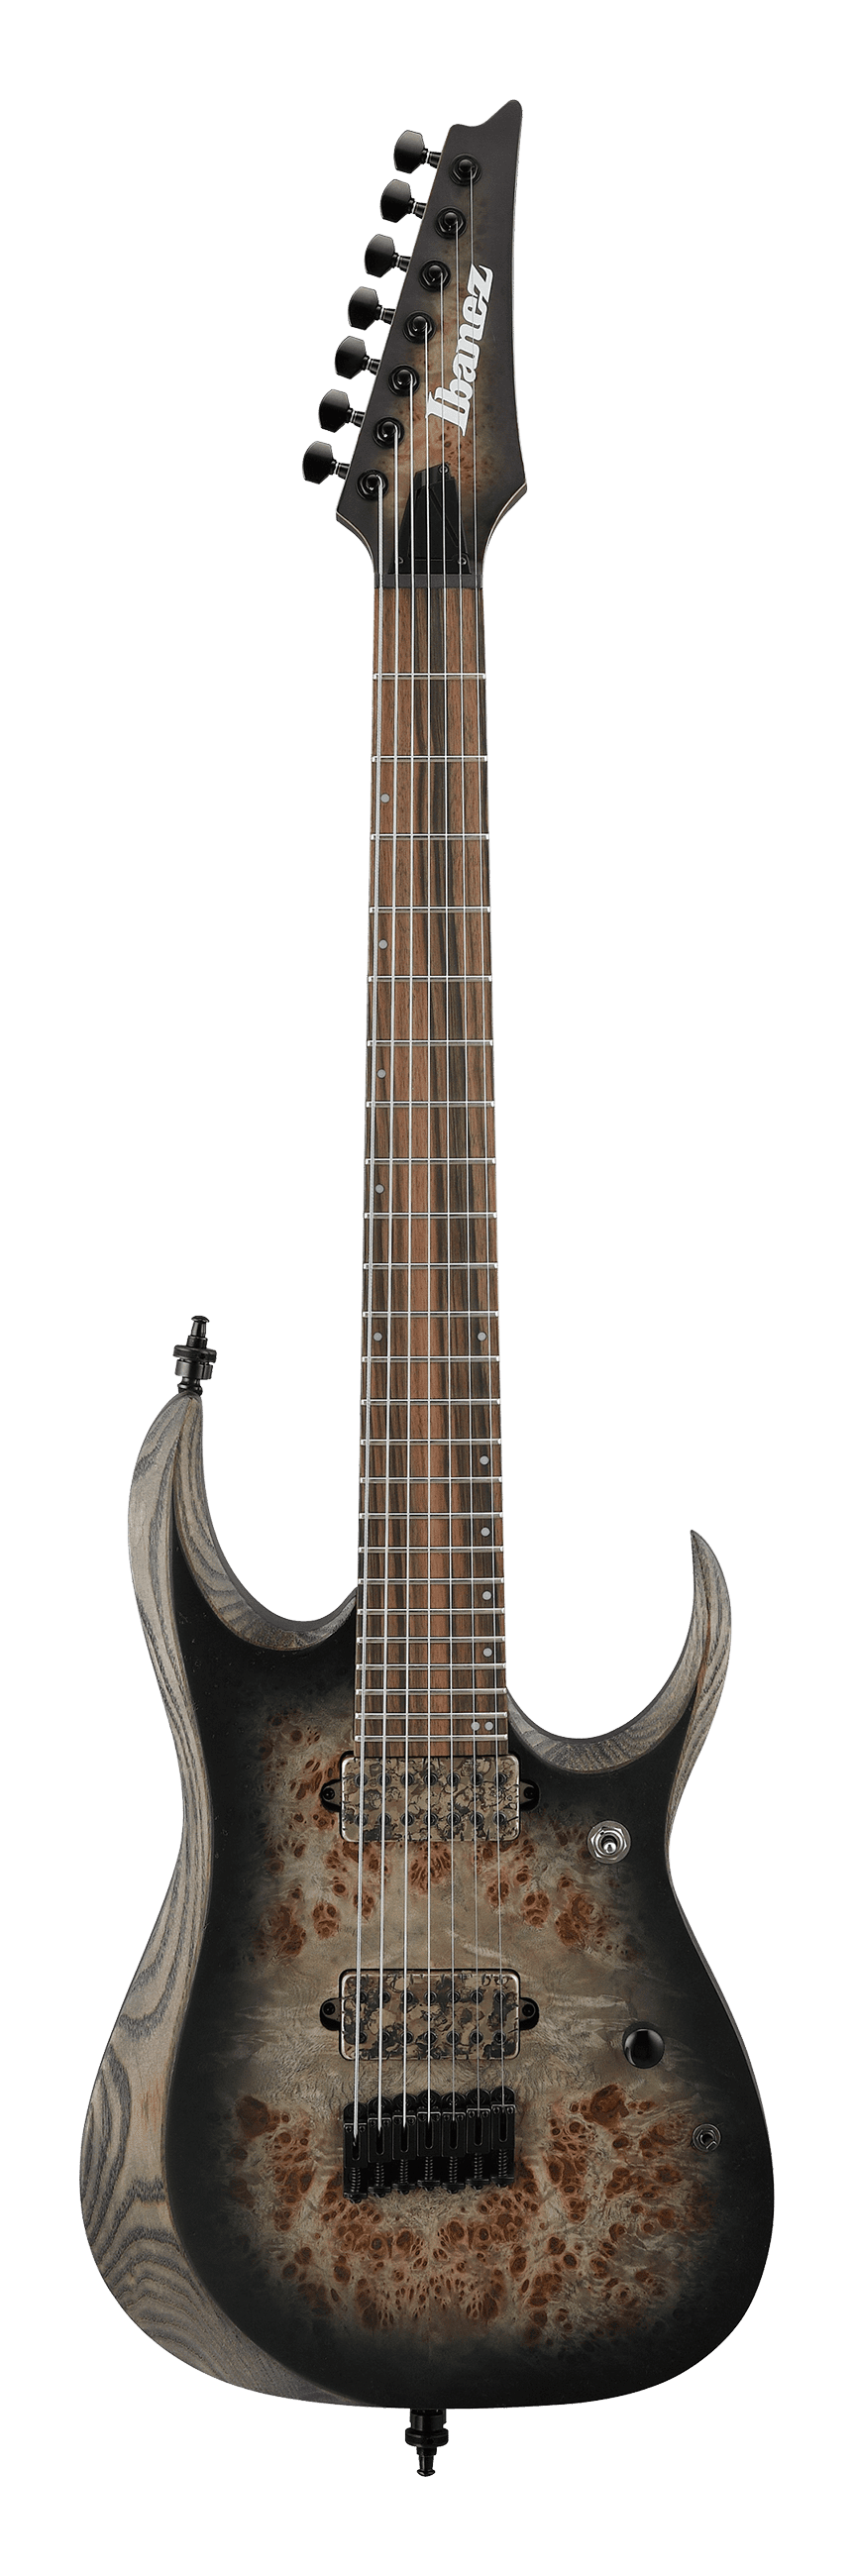 IBANEZ RGD Series RGD71ALPA Axion Label 7-String Electric Guitar (CKF : Charcoal Burst Black Stained Flat)